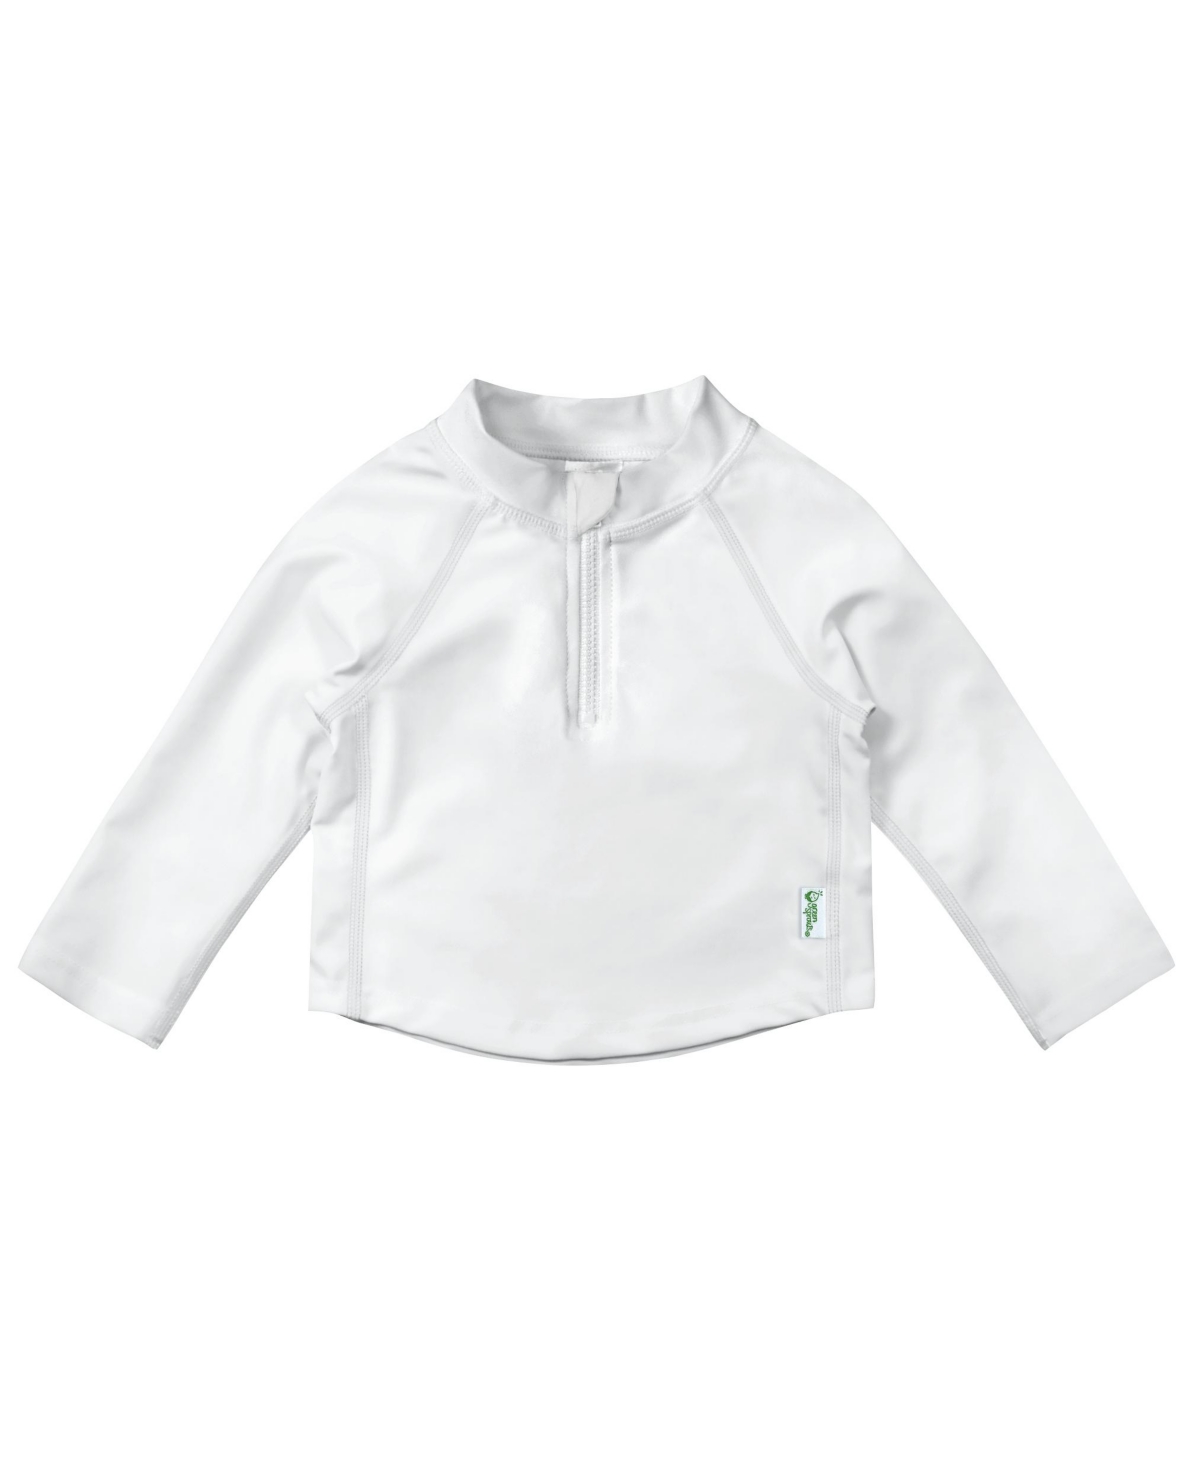 Shop Green Sprouts Toddler Boys And Girls Long Sleeve Zip Rashgaurd Shirt In White